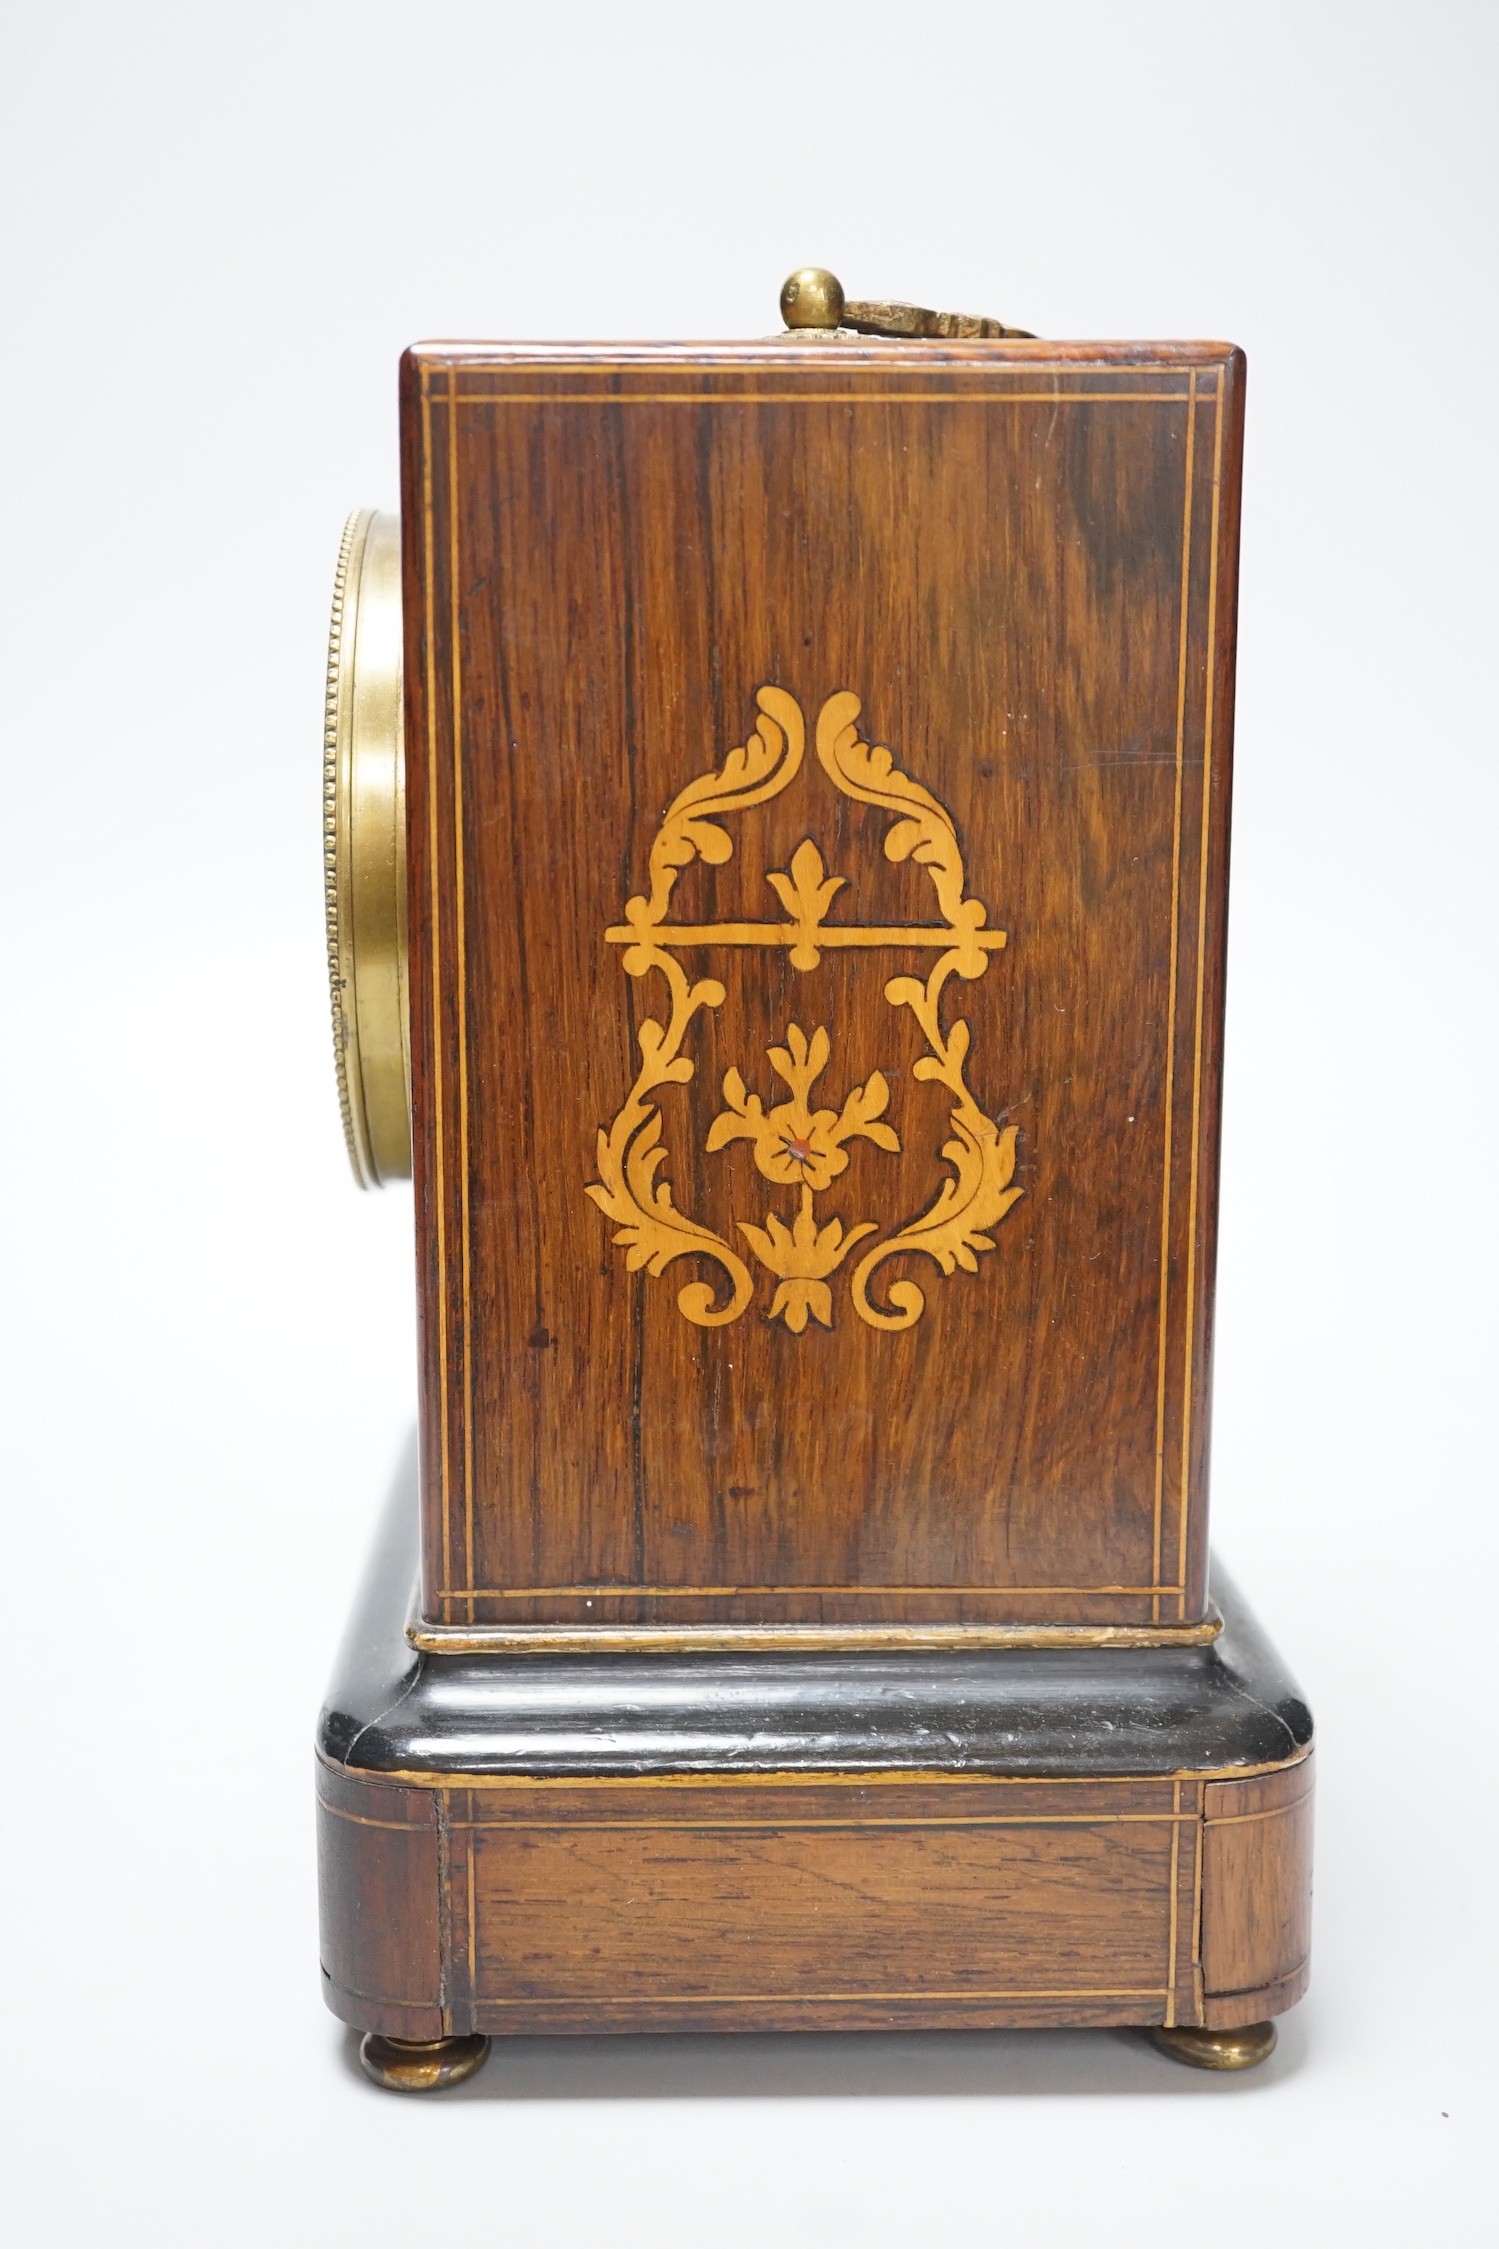 A 19th century French rosewood and marquetry mantel clock, 23cm